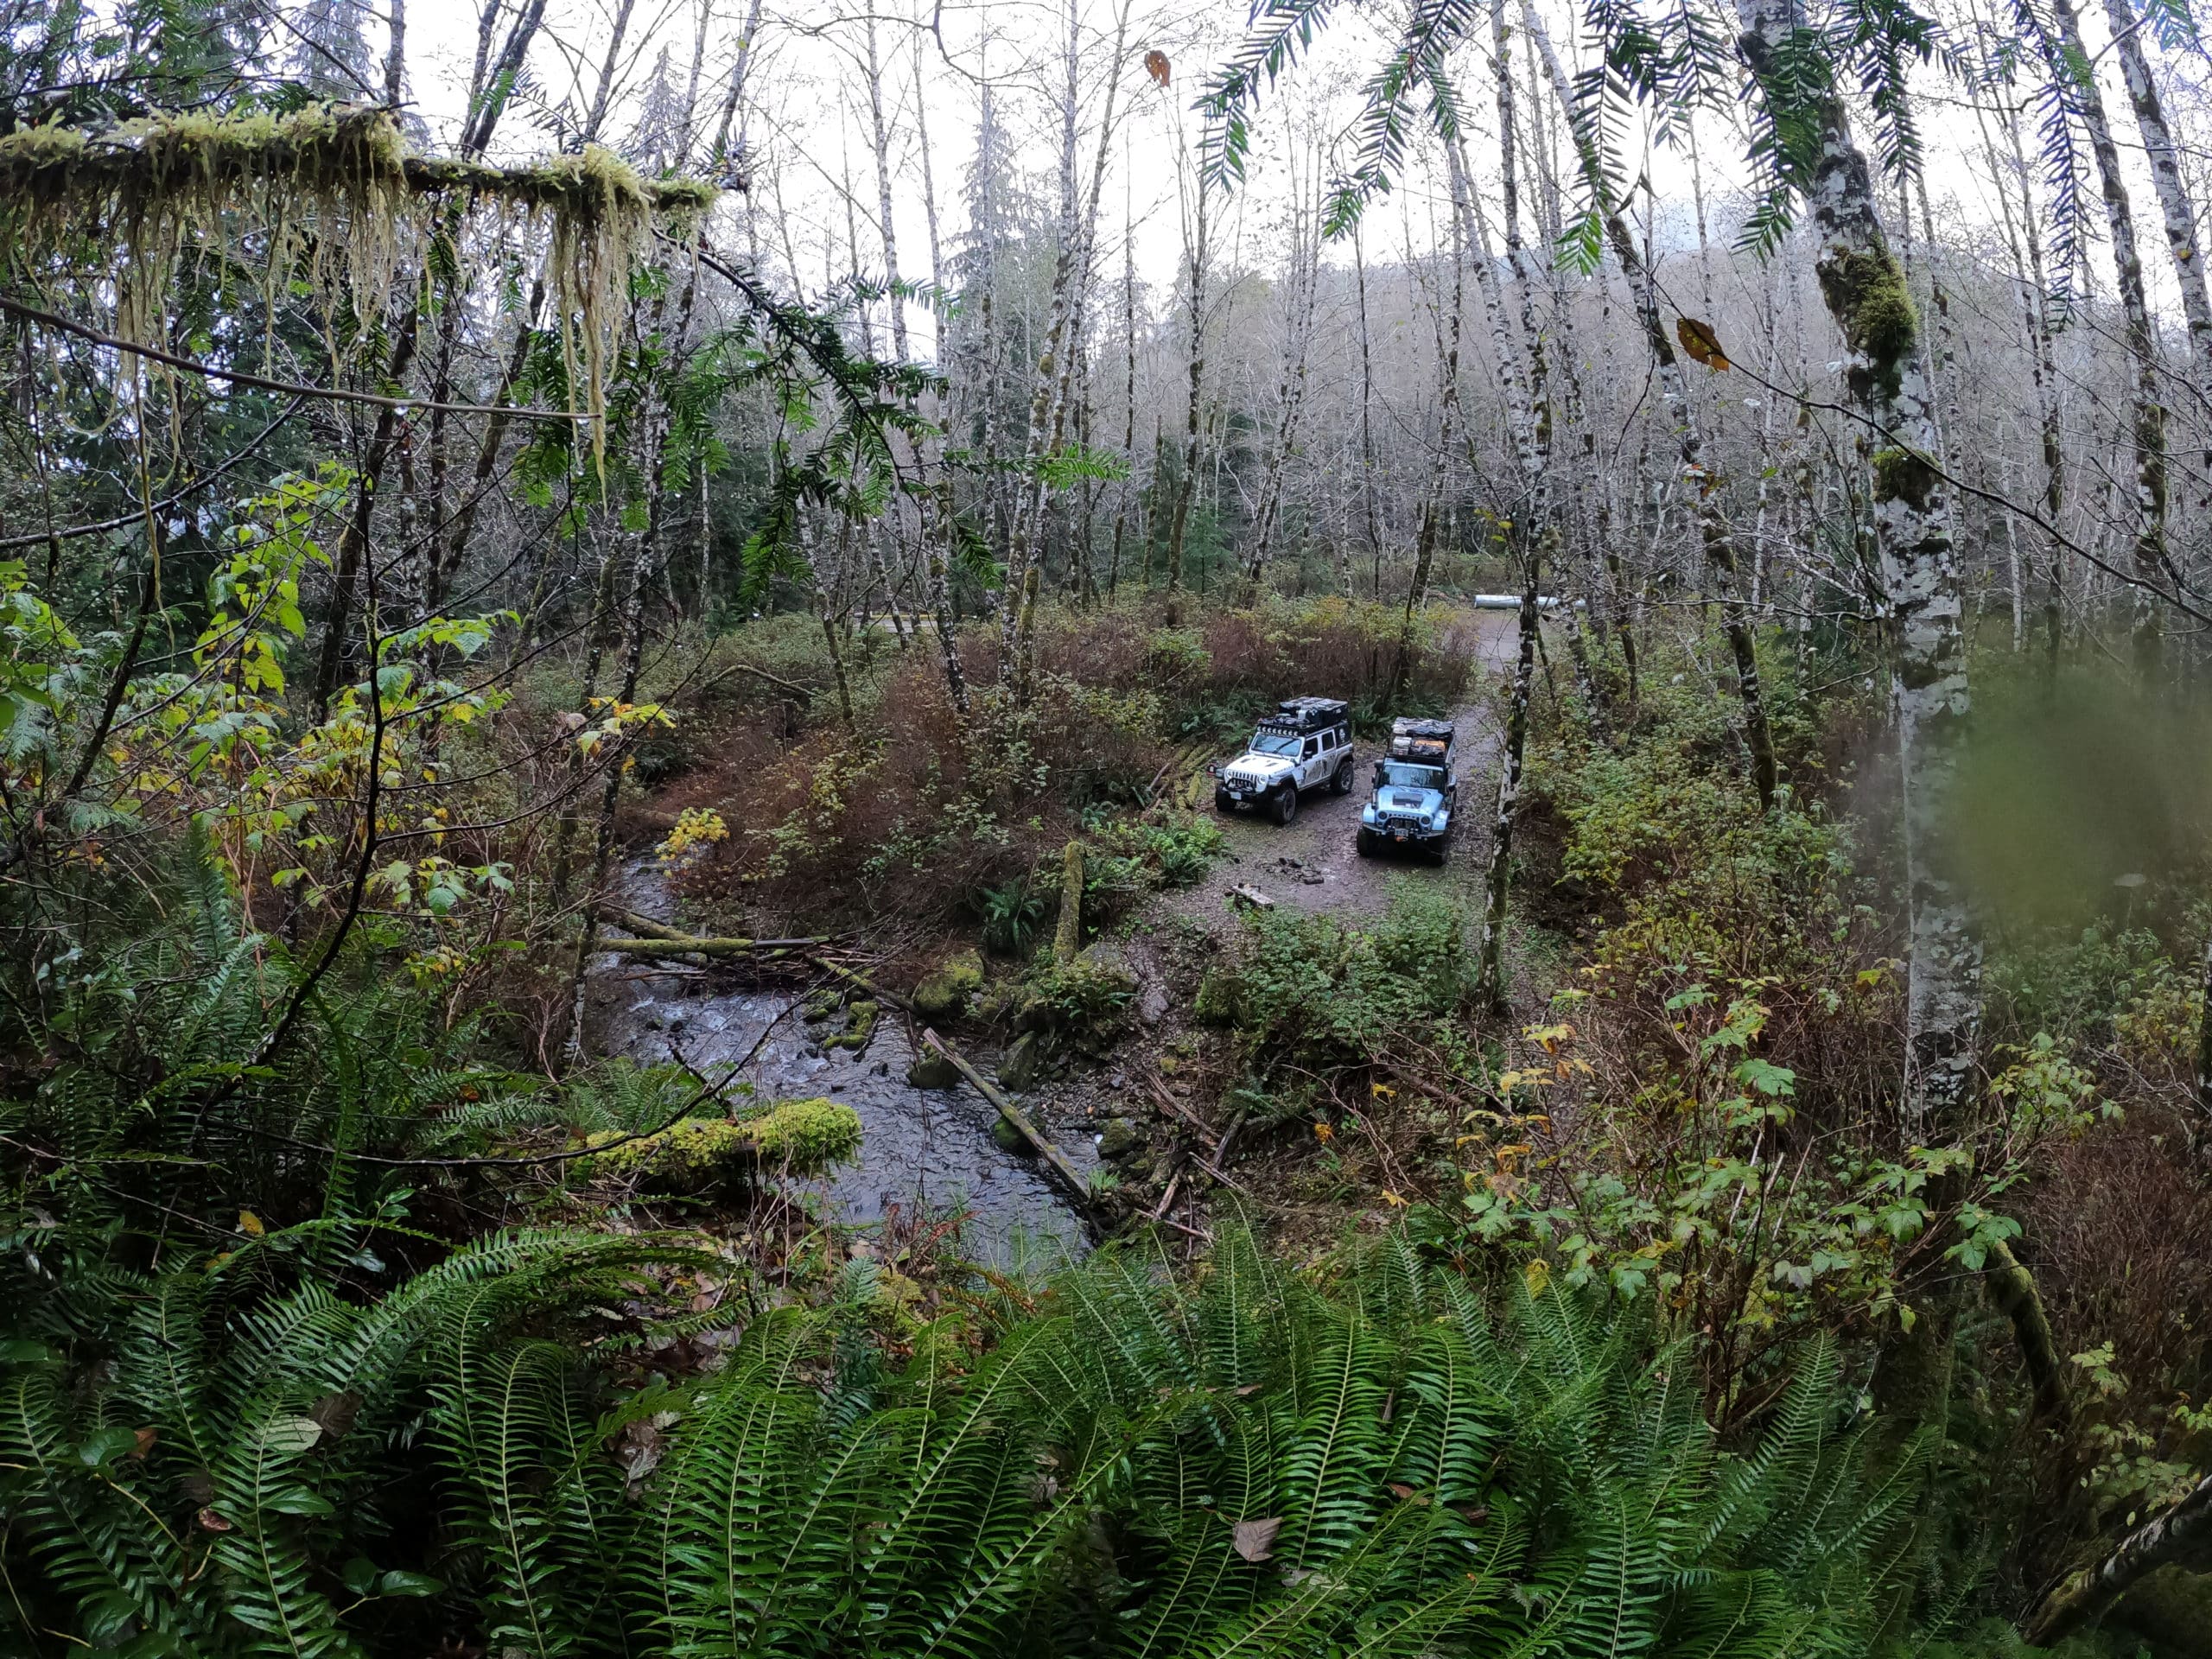 2 jeeps parked off-road next to a creek